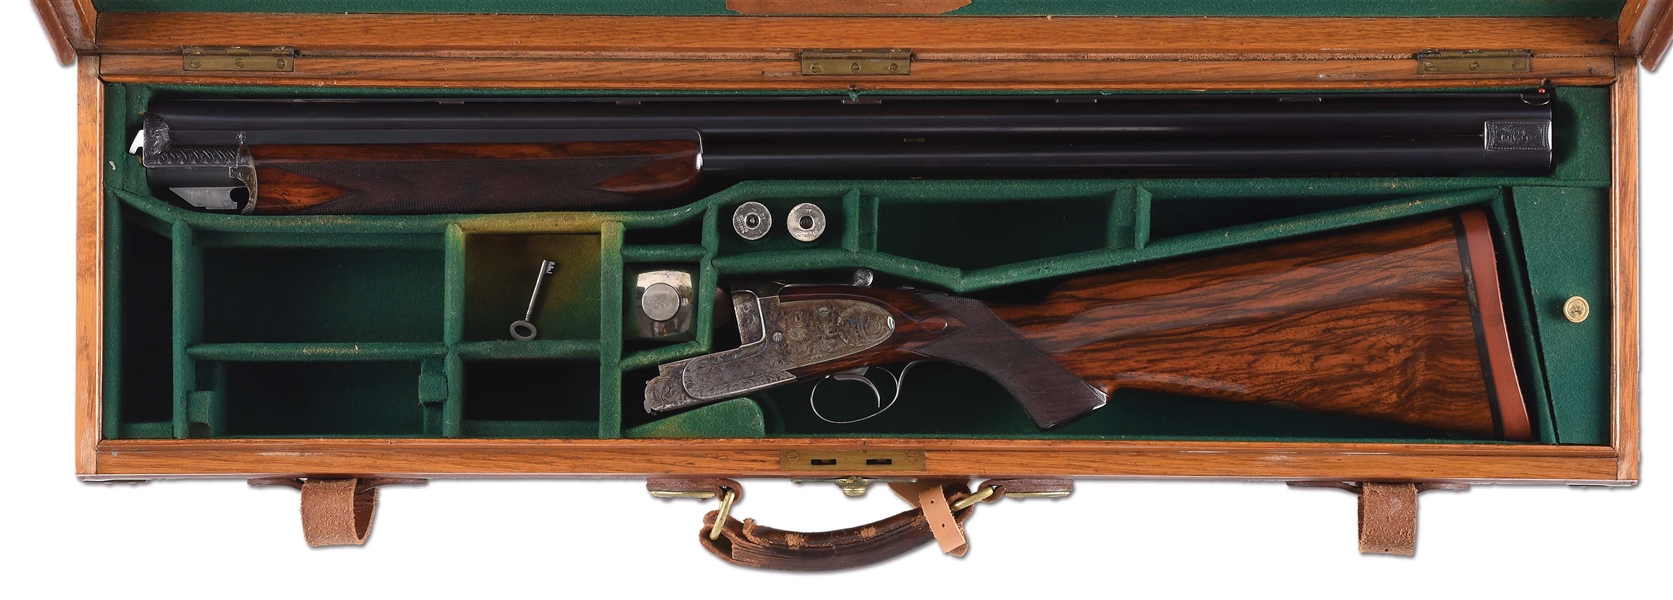 (C) STOUT WESTLEY RICHARDS "OVUNDO" HAND DETACHABLE LOCK, EJECTOR, SINGLE TRIGGER PIGEON OR TRAP GUN WITH CASE.